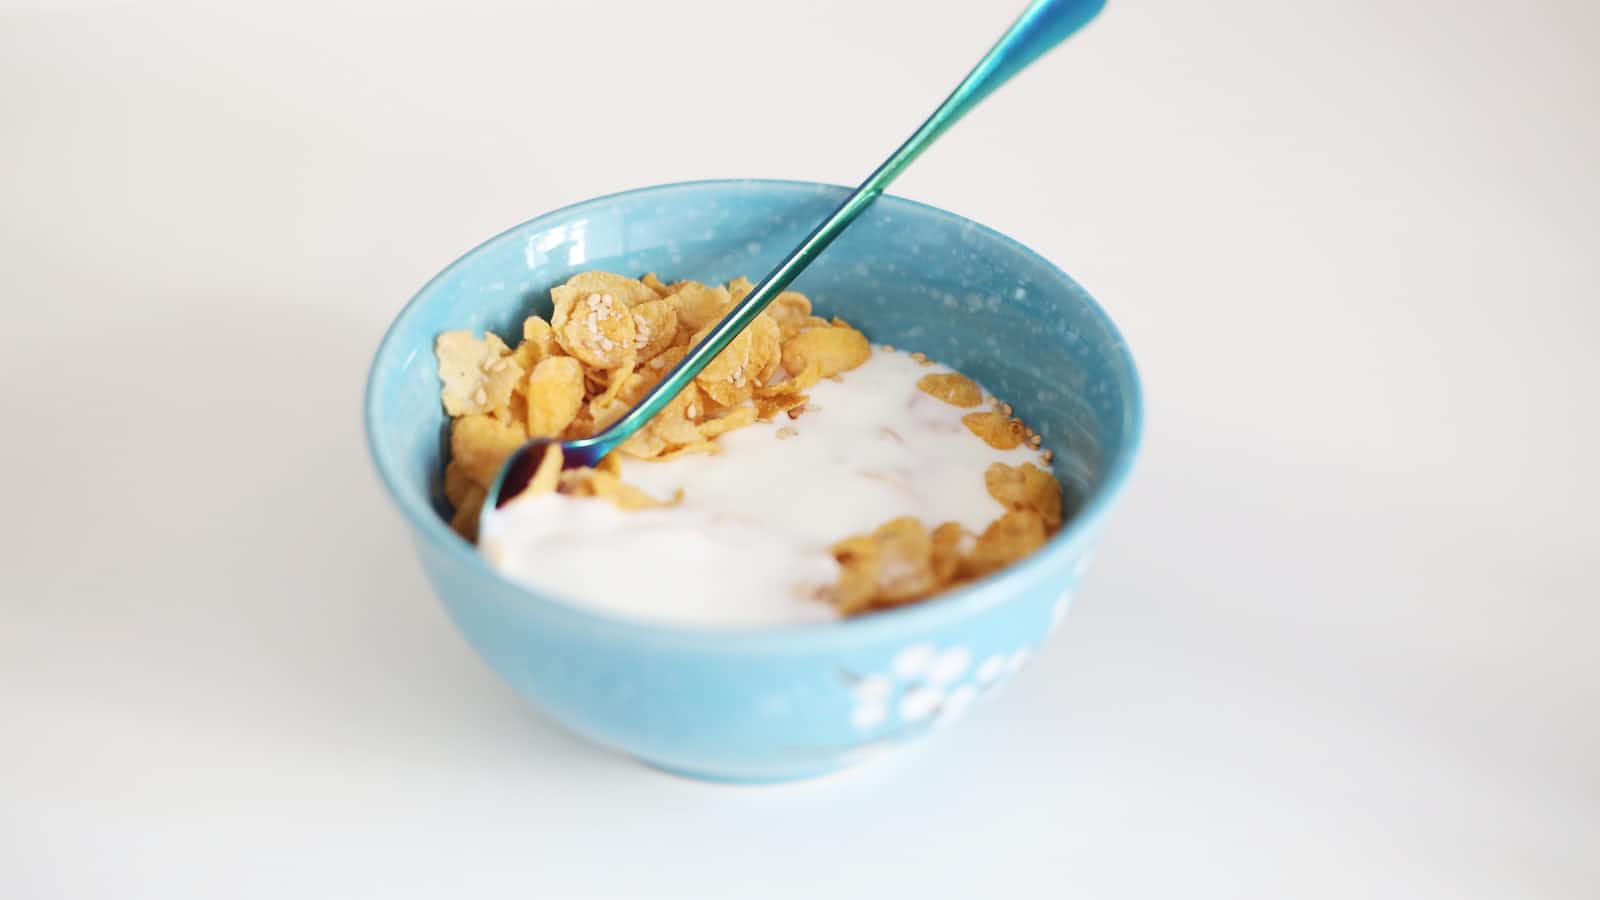 A bowl of cereal with milk and spoon